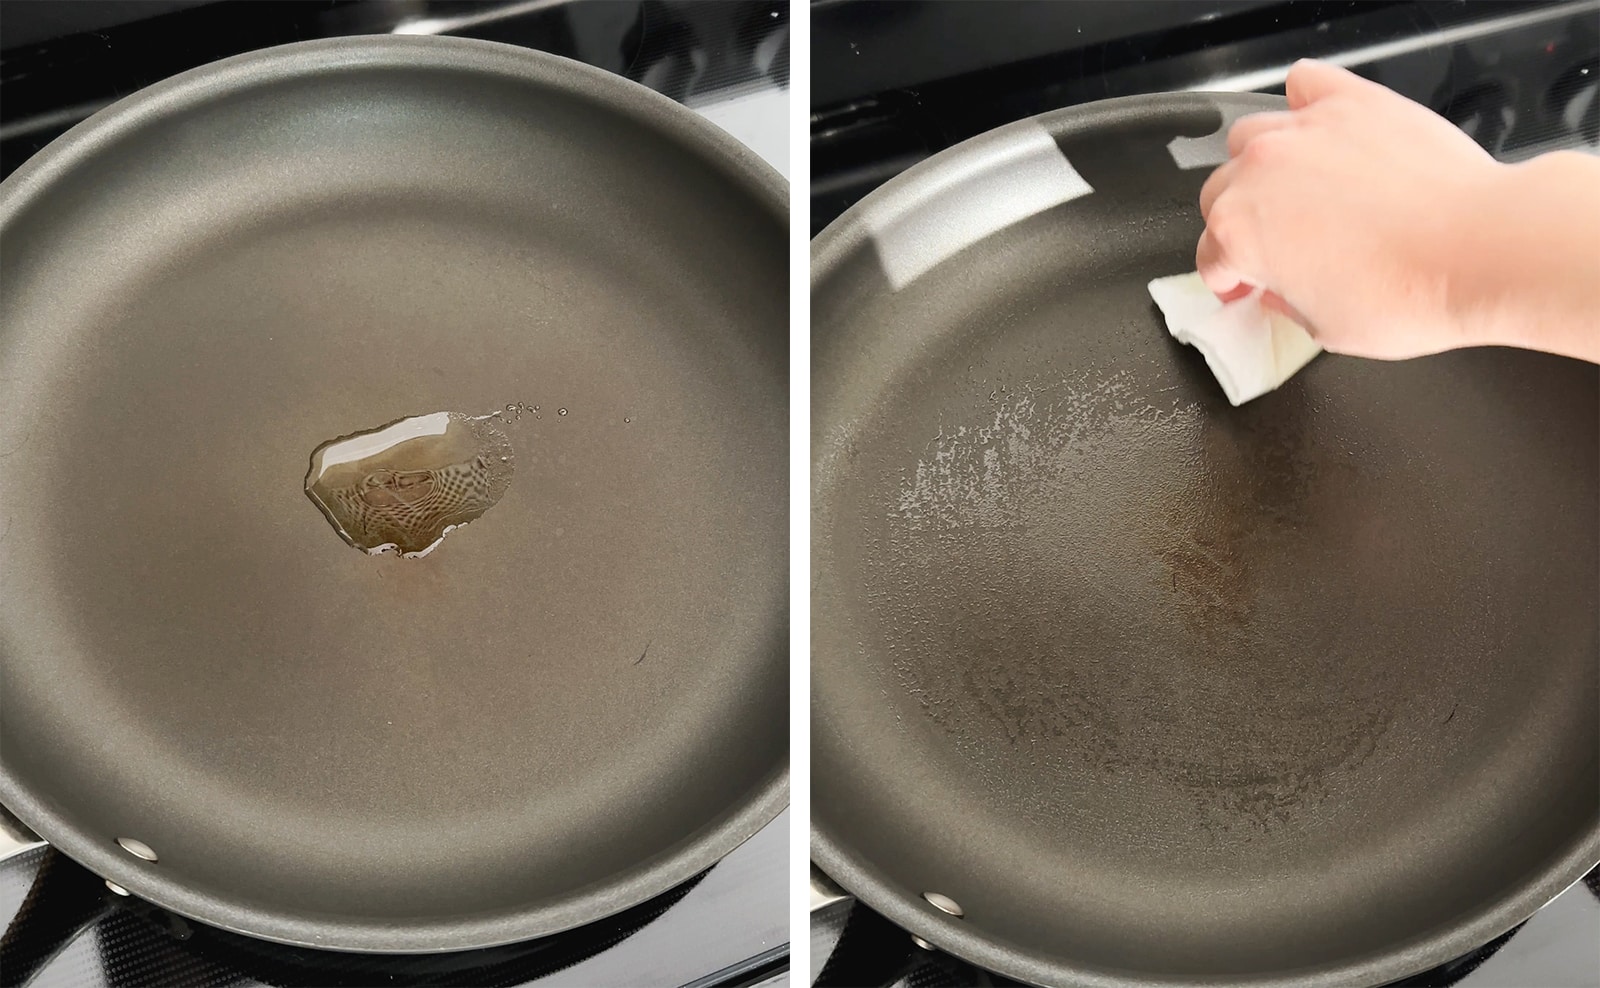 Left to right: a small amount of oil in a pan, wiping away oil in pan with a paper towel.